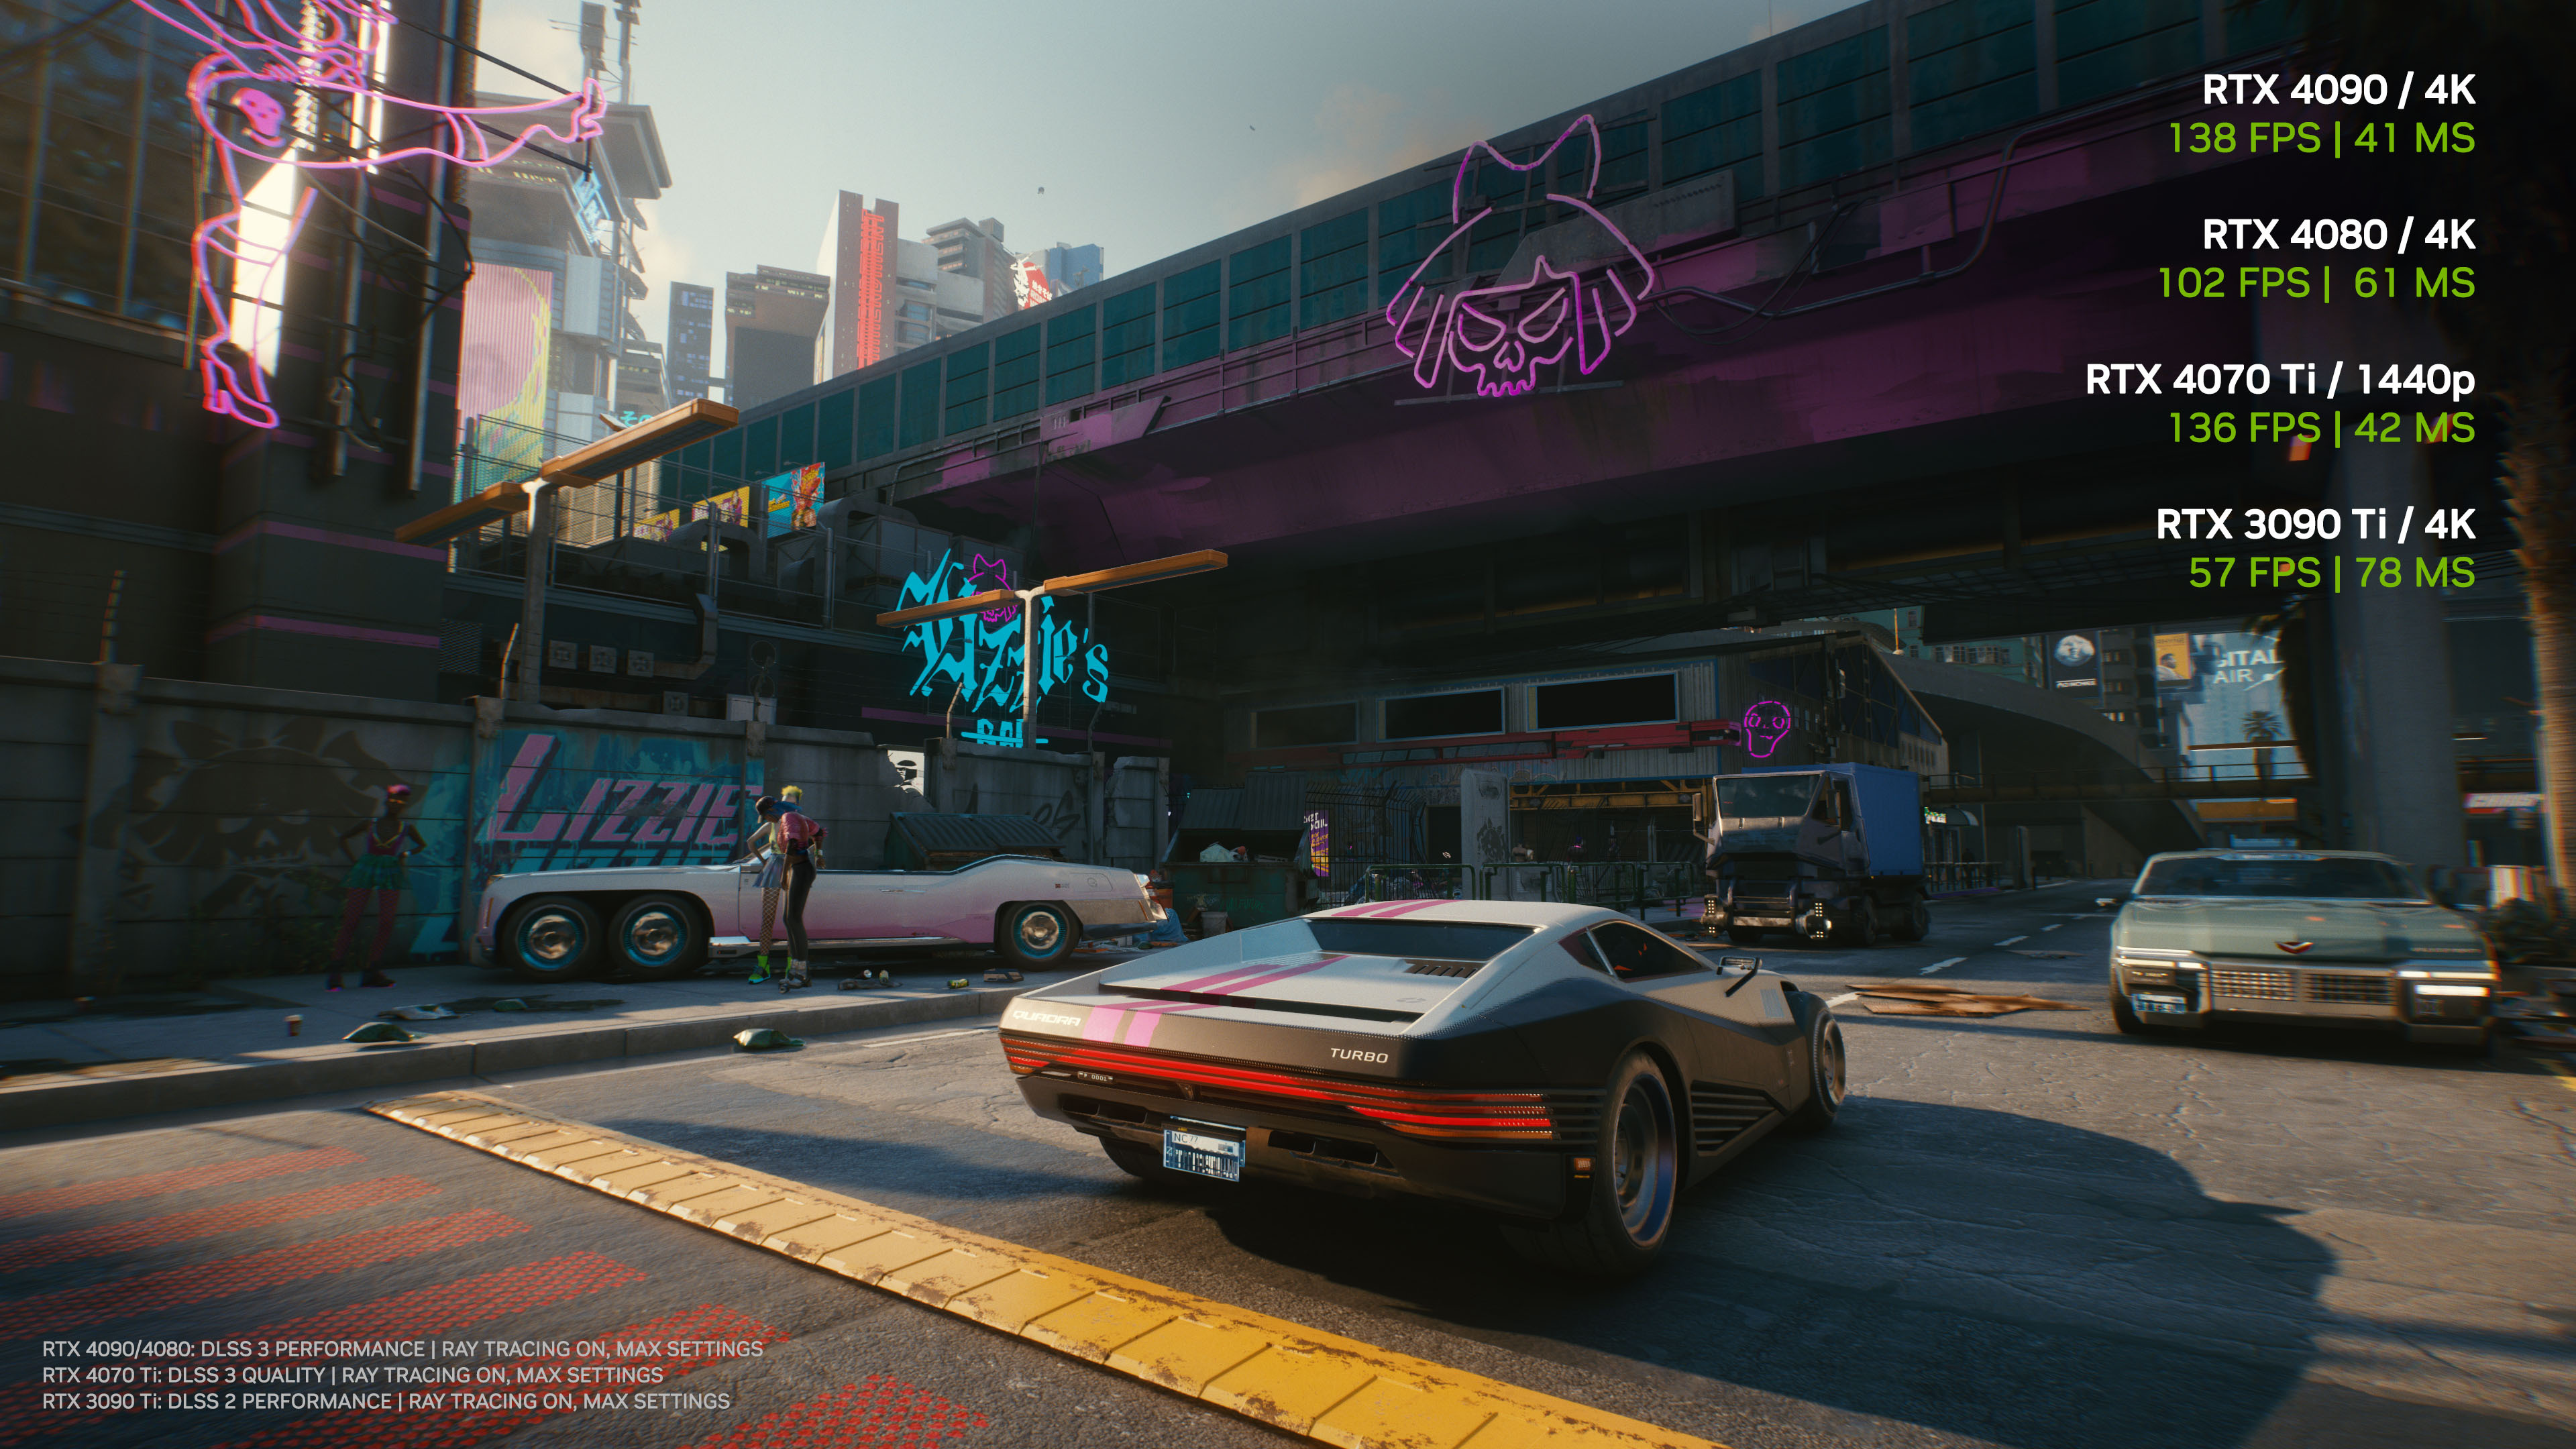 Cyberpunk 2077 patch with Ray Tracing Overdrive mode, NVIDIA DLAA